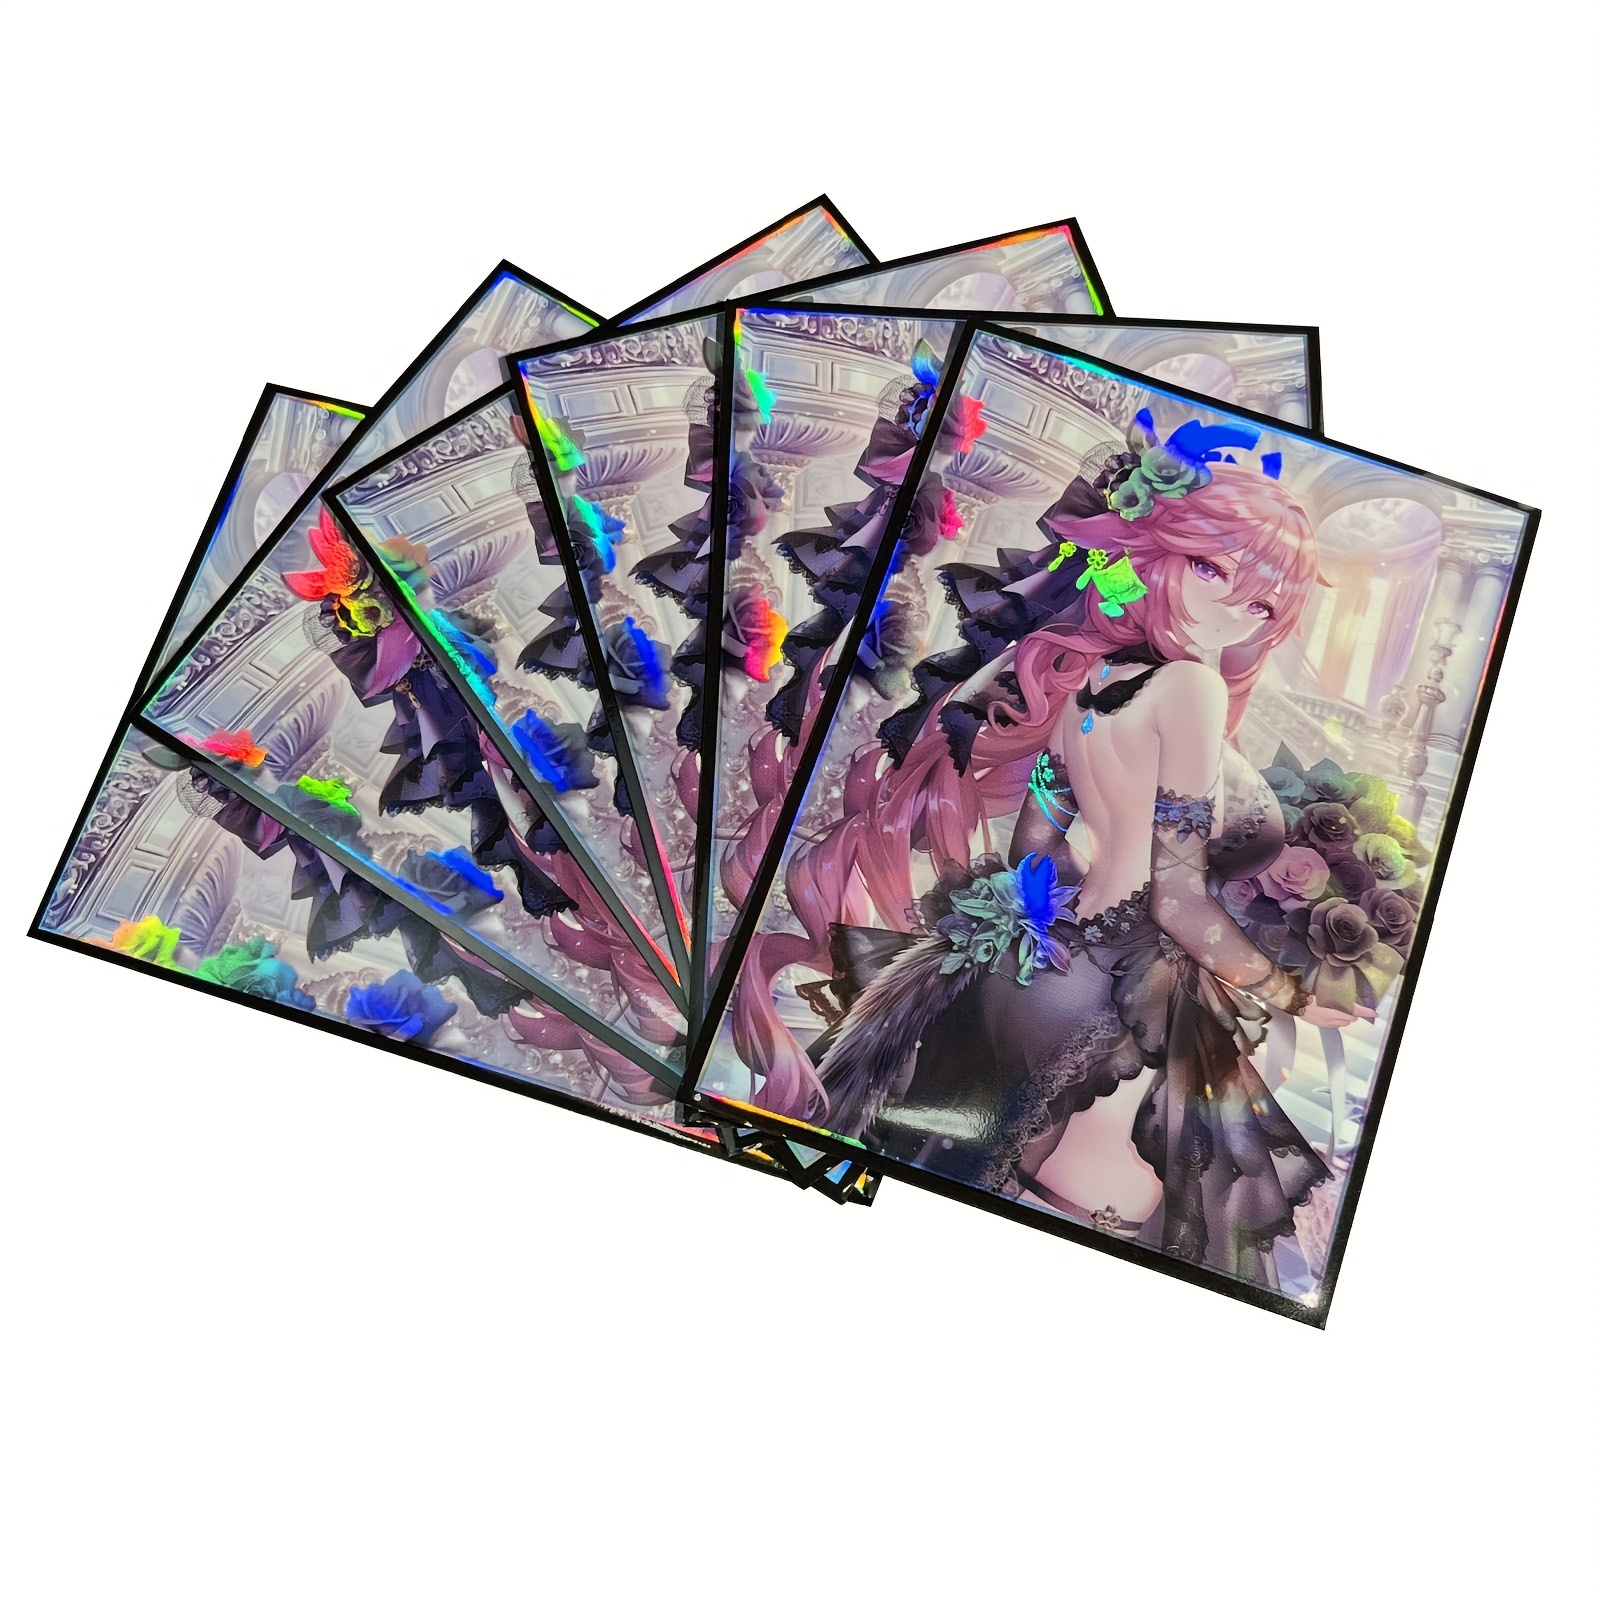 100pcs/pack 65*90mm Card Sleeve Cards Protector Unsealed Game